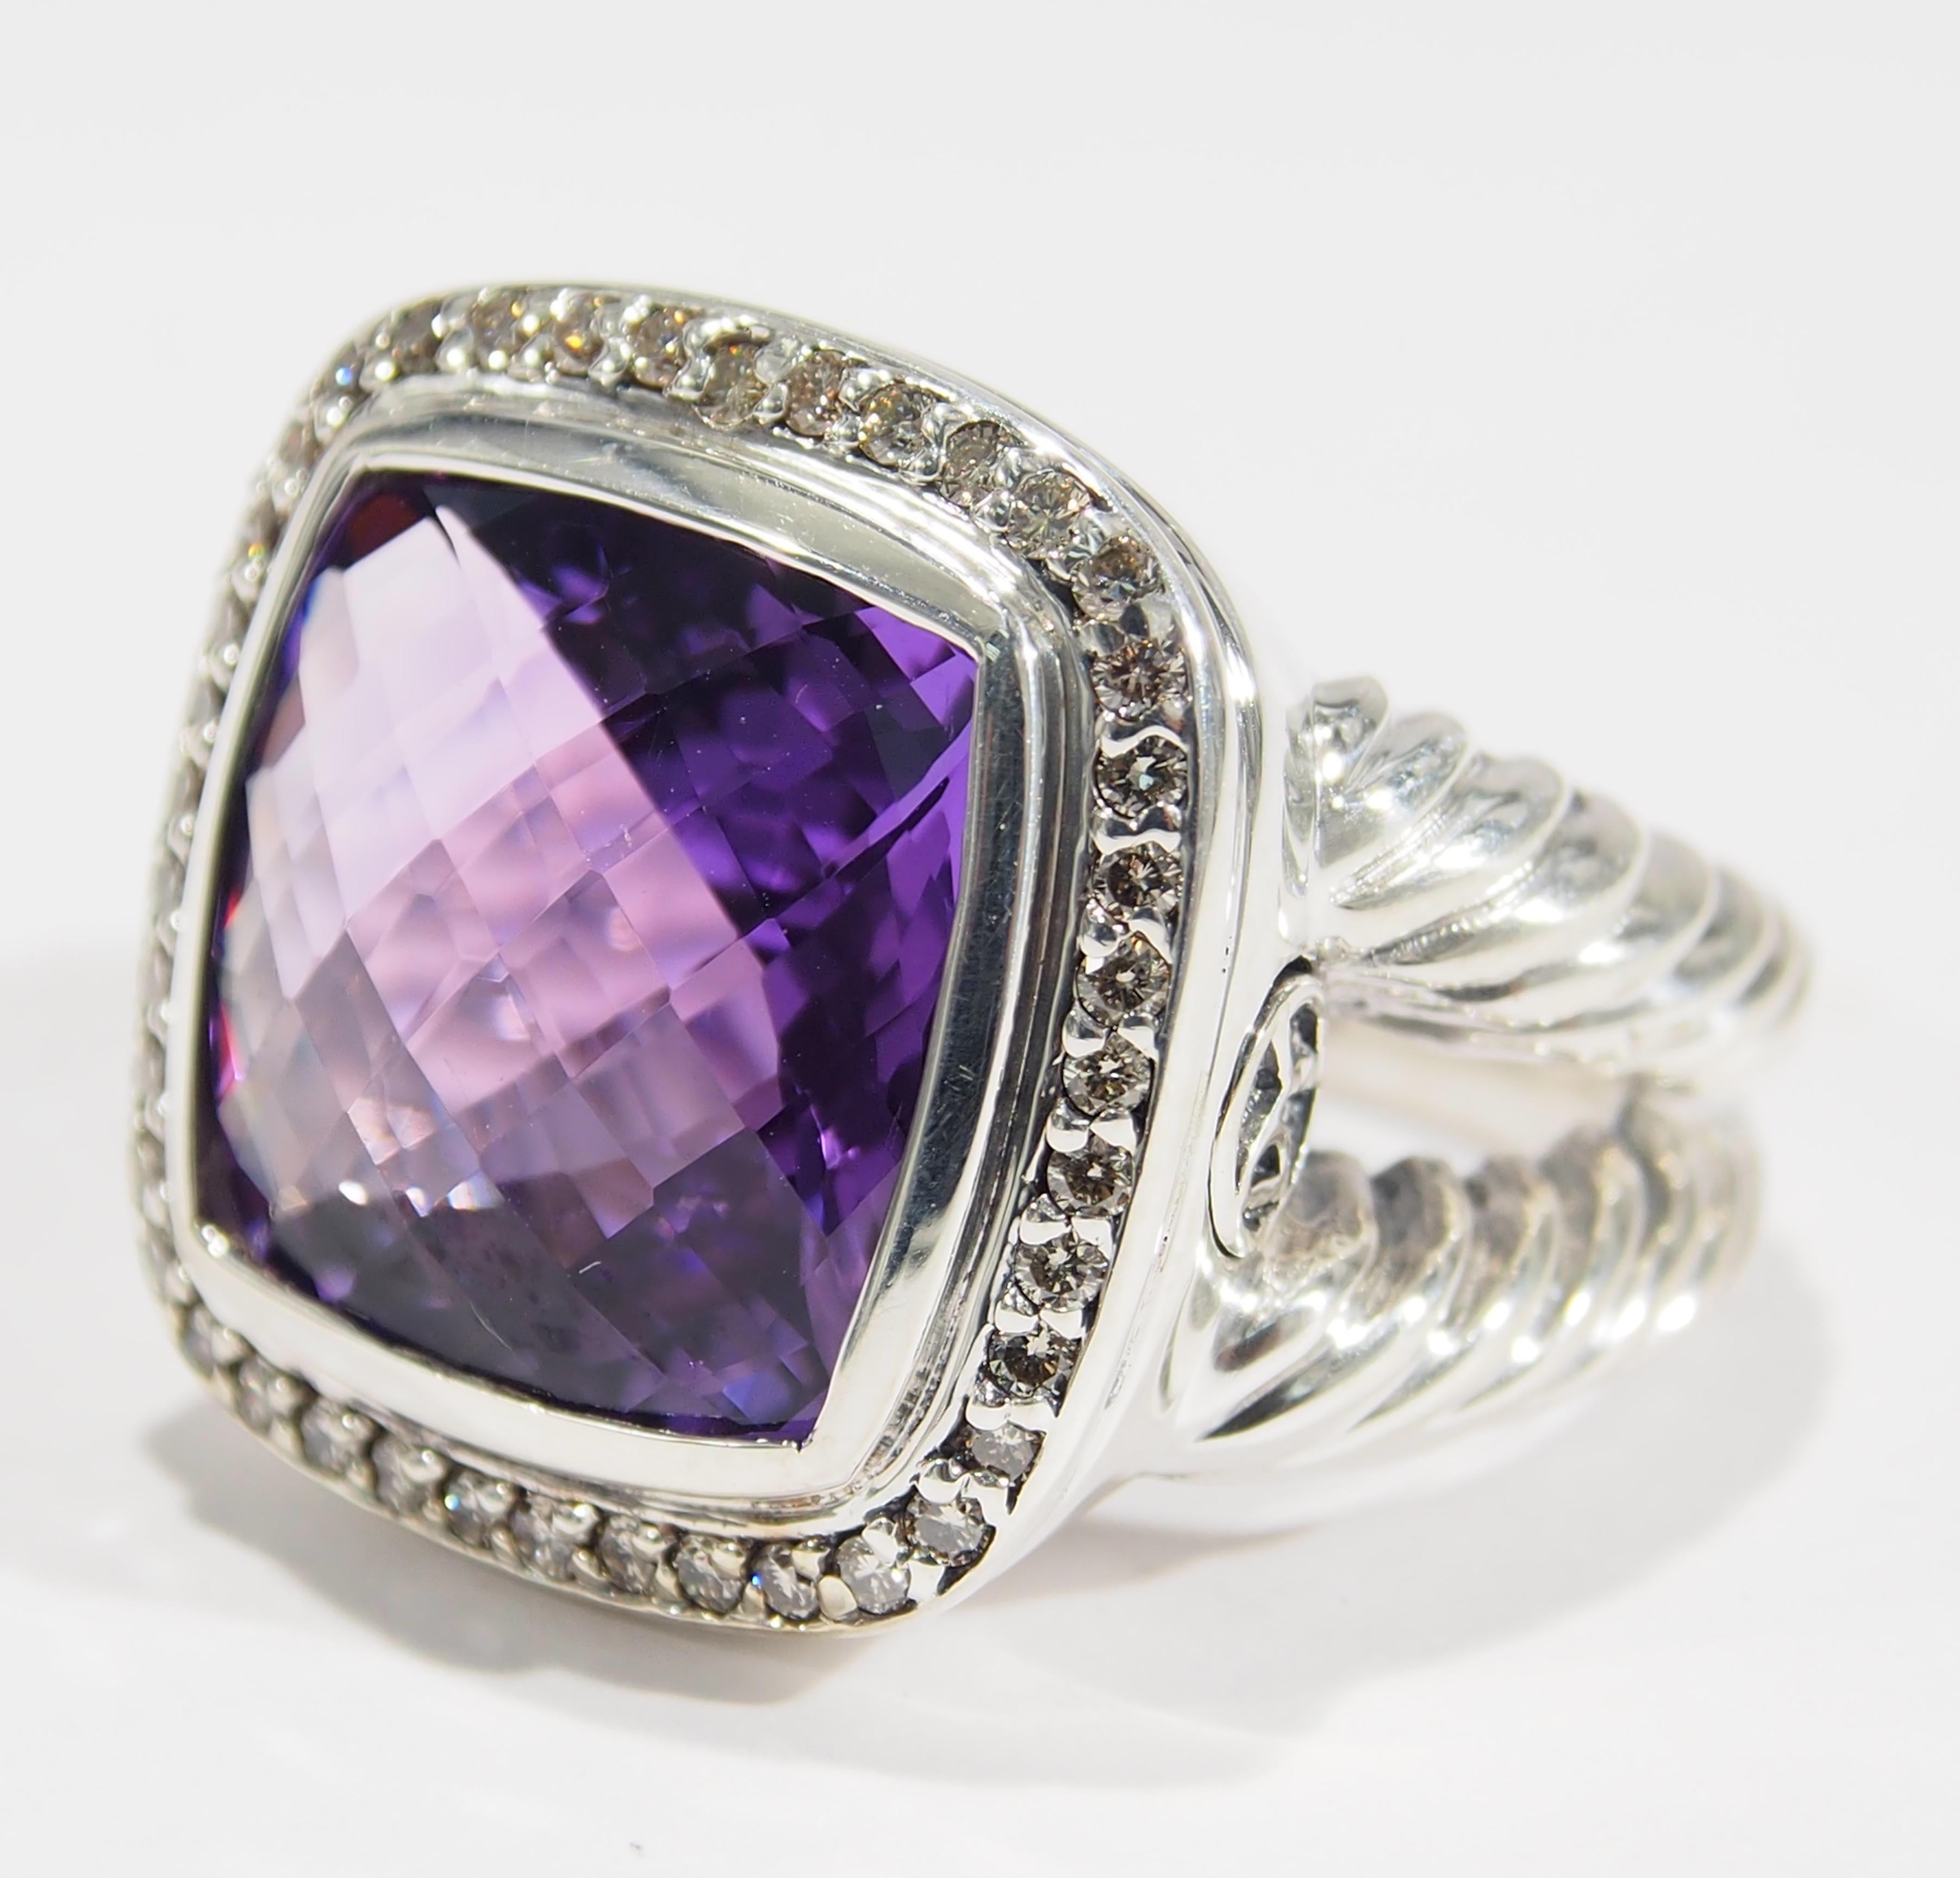 From one of America's favorite designers, David Yurman is his Sterling Silver Albion Ring. The Ring features a faceted 14x14mm Amethyst surrounded by (42) Round Brilliant Cut Diamonds, approximately 0.30ctw, G-J in Color, VS in Clarity. Easily worn